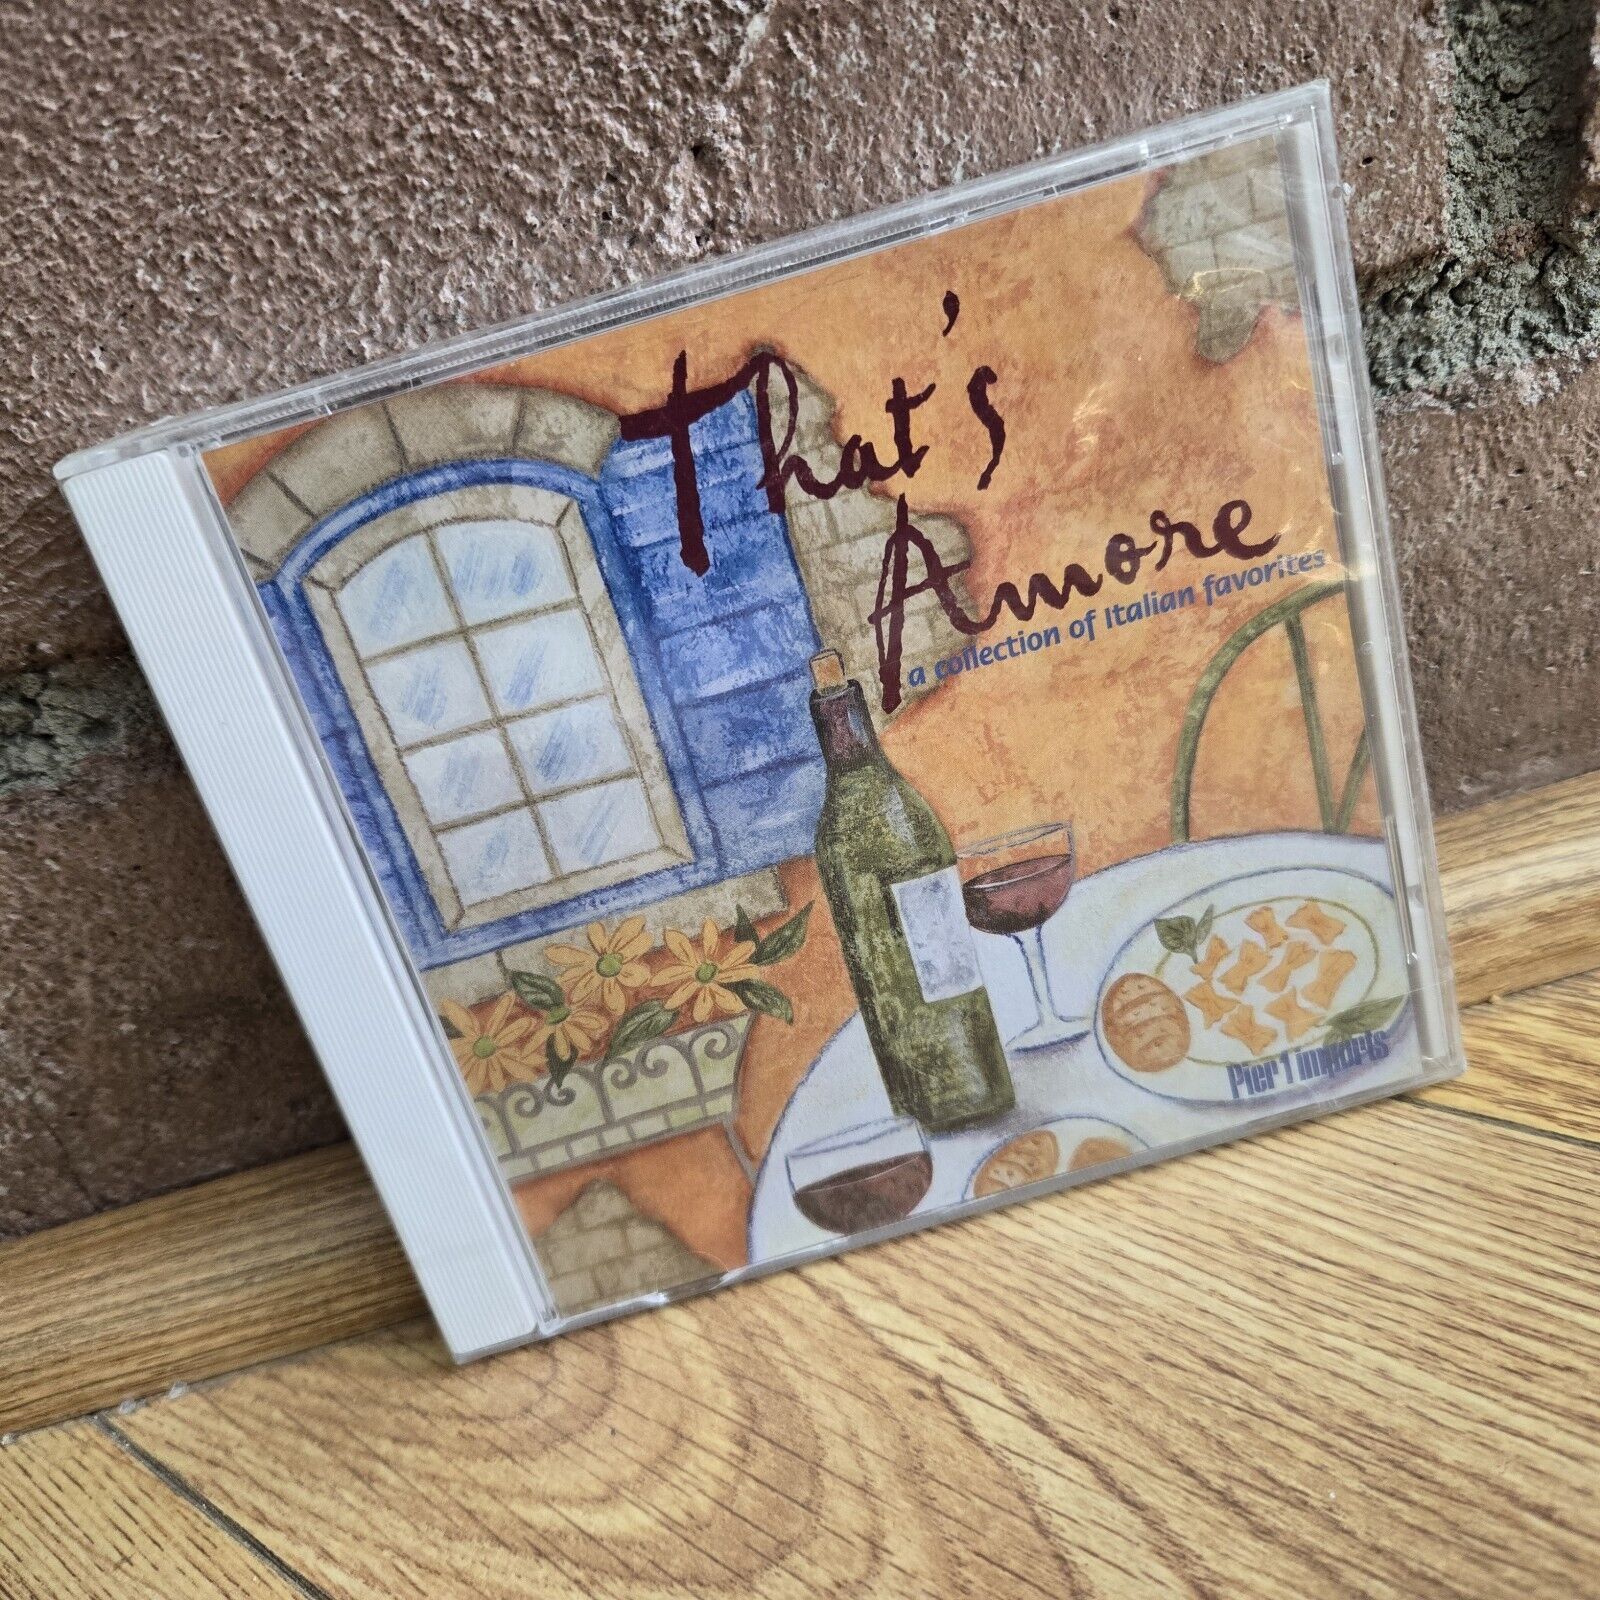 VTG SEALED That's Amore: A Collection of Italian Favorites: Pier 1 2001 Music CD